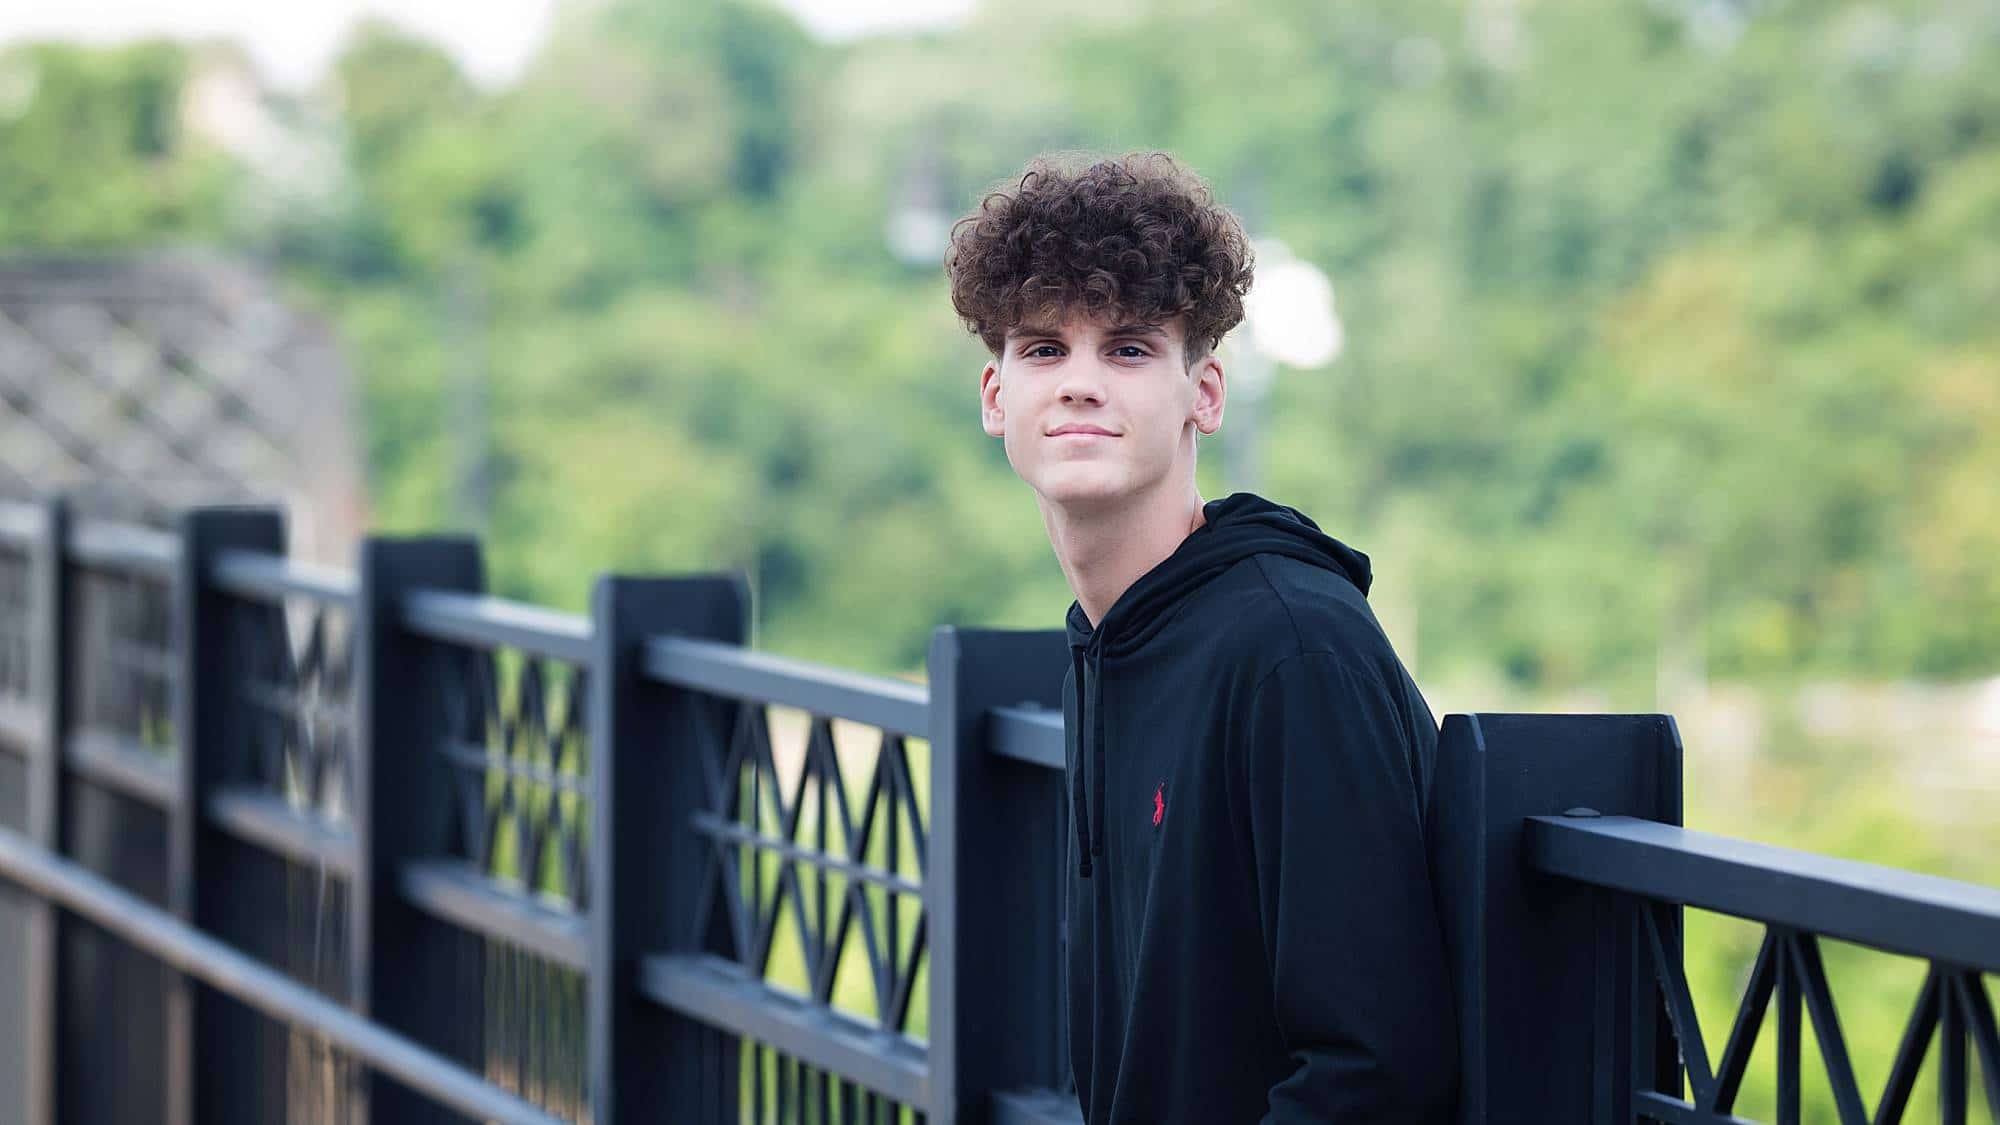 image of a senior guy with dark curly hair, wearing a black hooded sweatshirt, leaning against an black railing